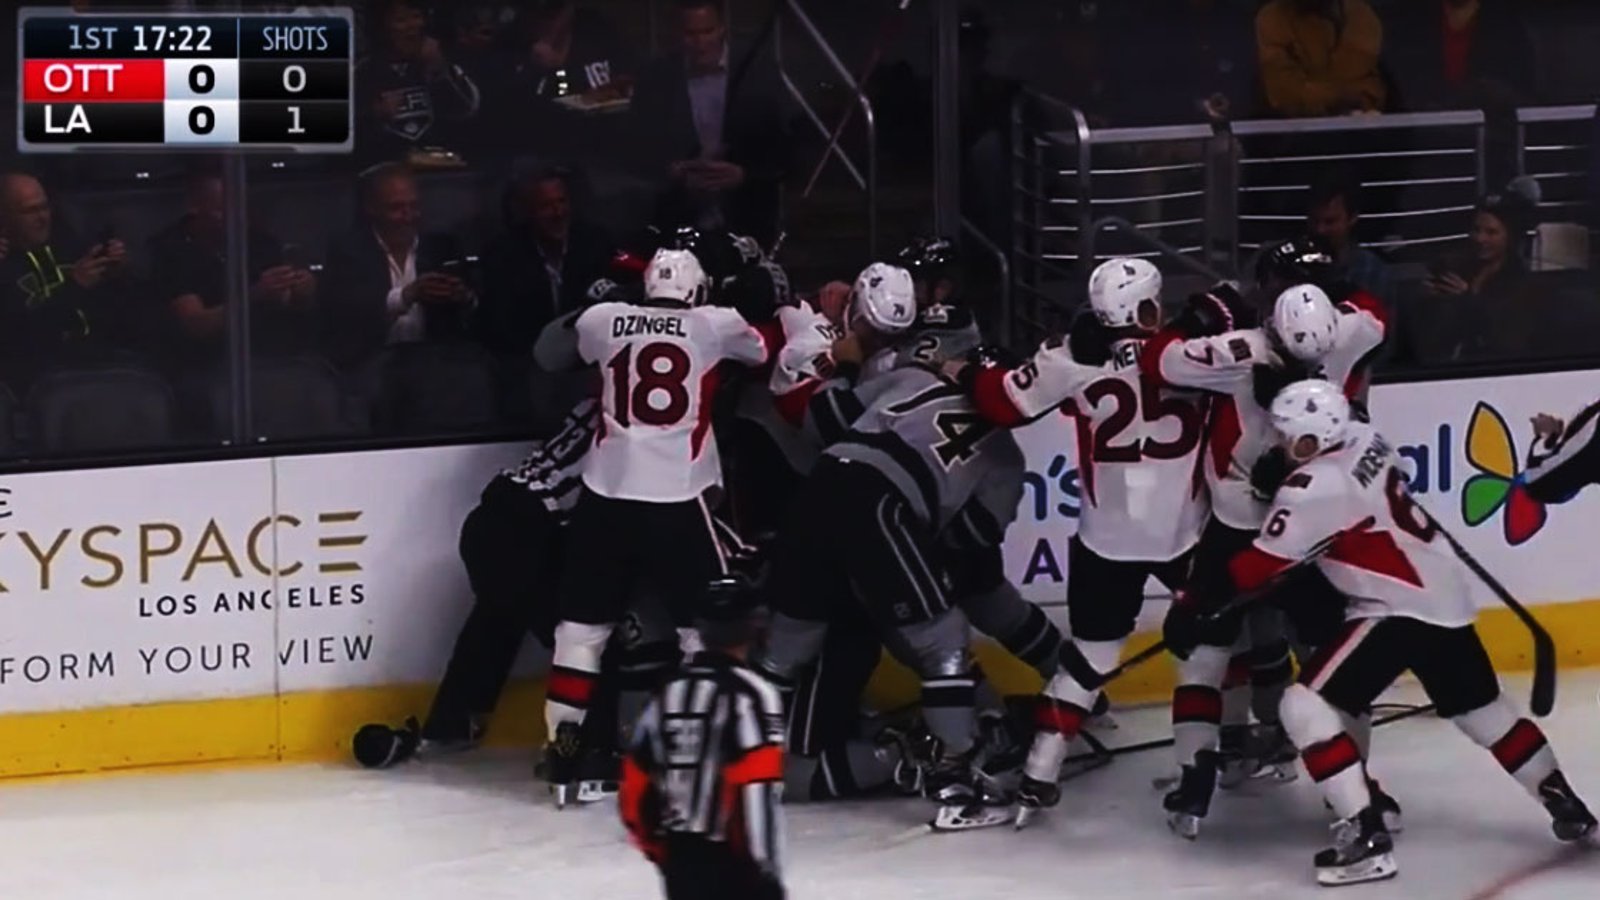 Nasty hit laid on Tyler Toffoli, possible suspension?